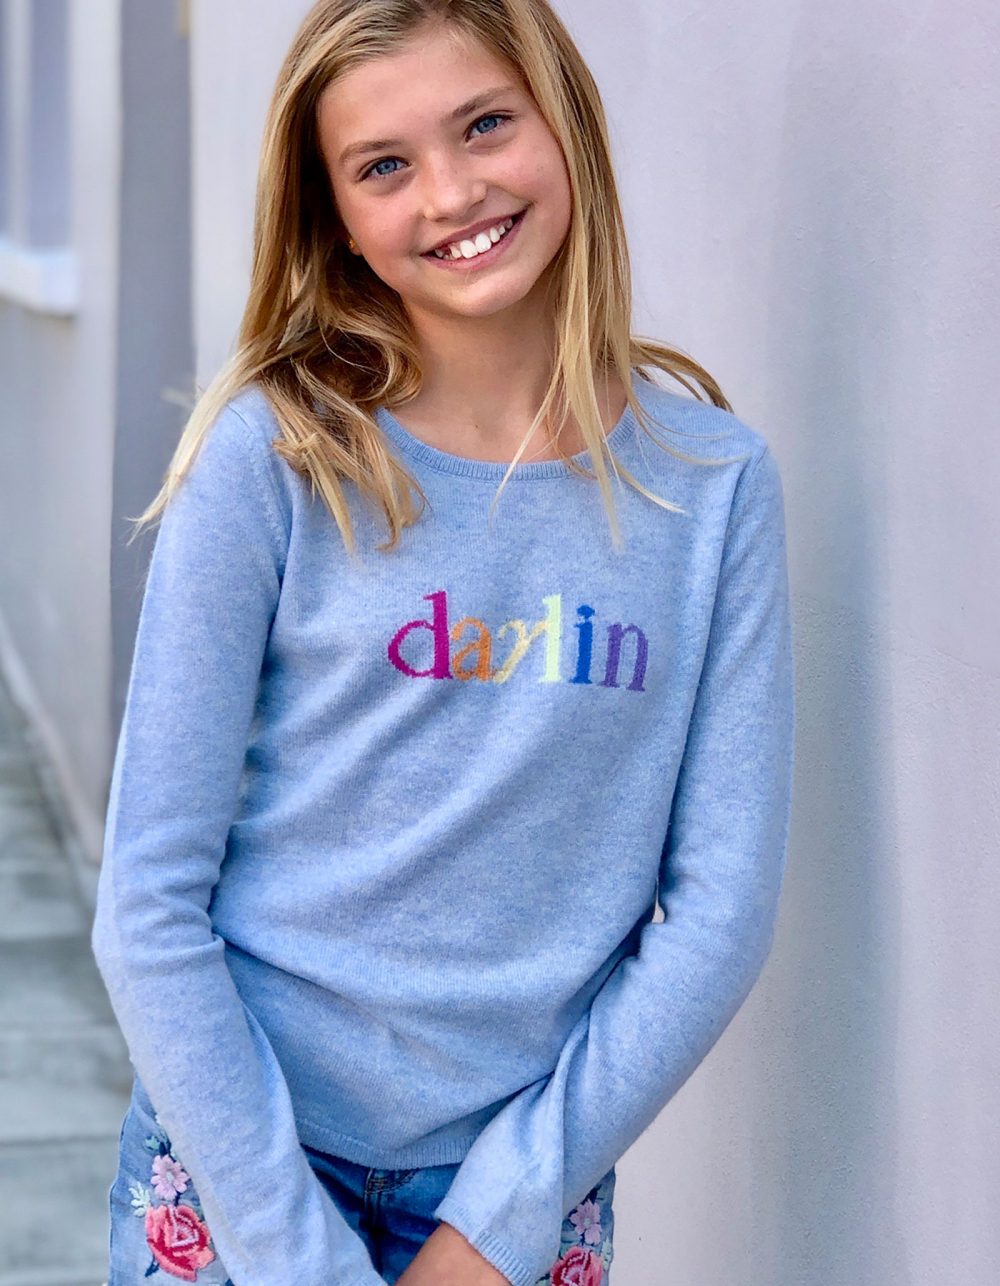 A smiling child in a darlin girl cashmere jumper, one of the signature styles in kids cashmere jumpers at malin darlin.